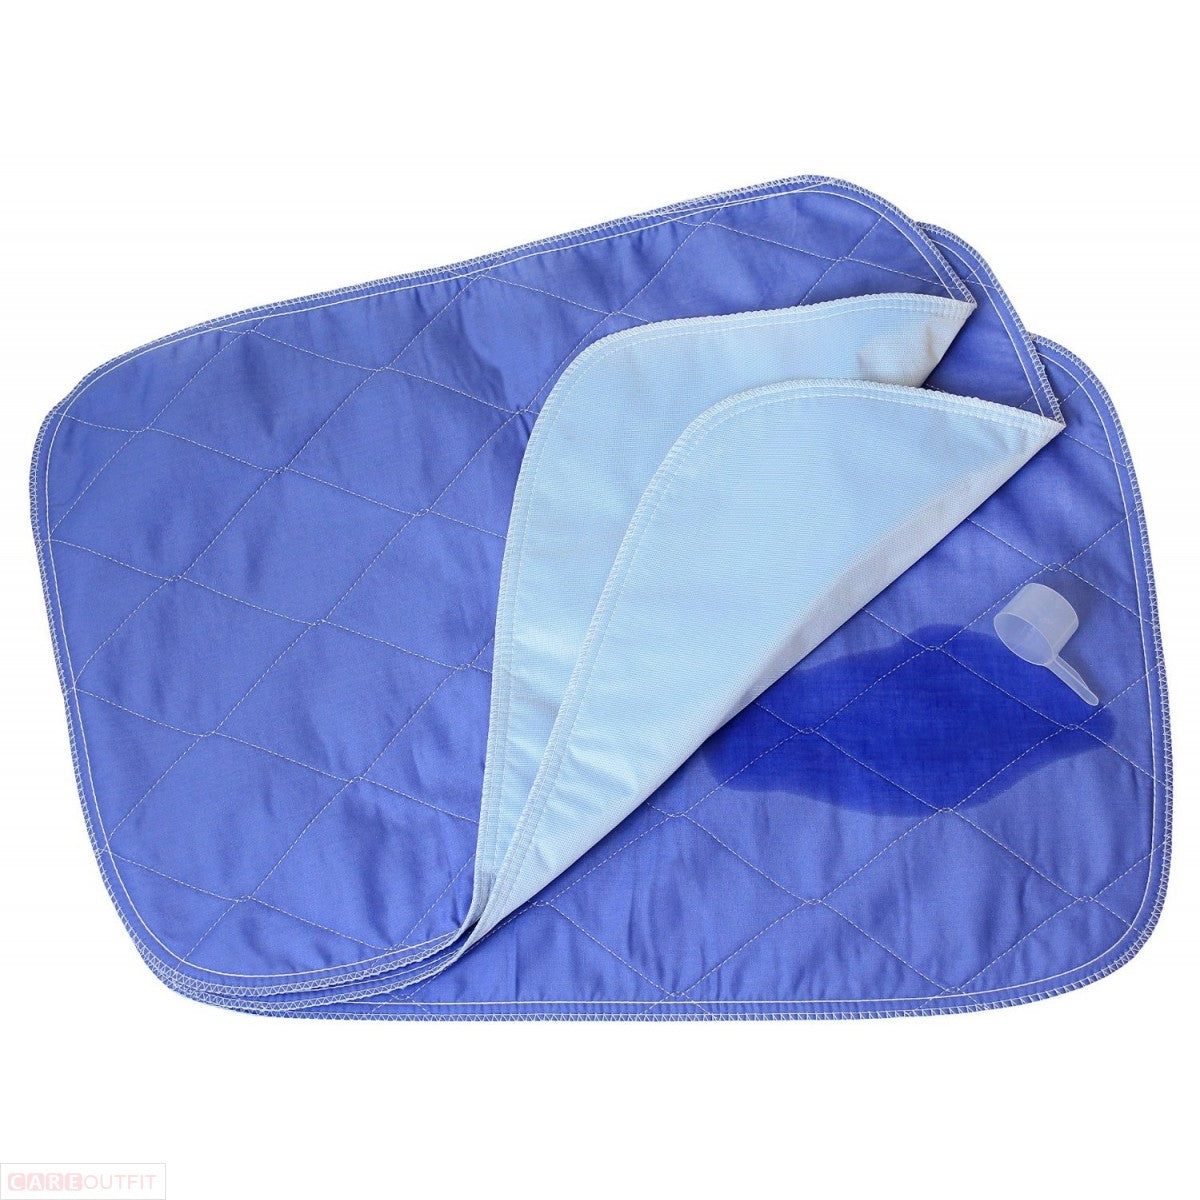 Washable Bed Pads Chair Pads/Incontinence Small Underpad - 18x24-4 Pack